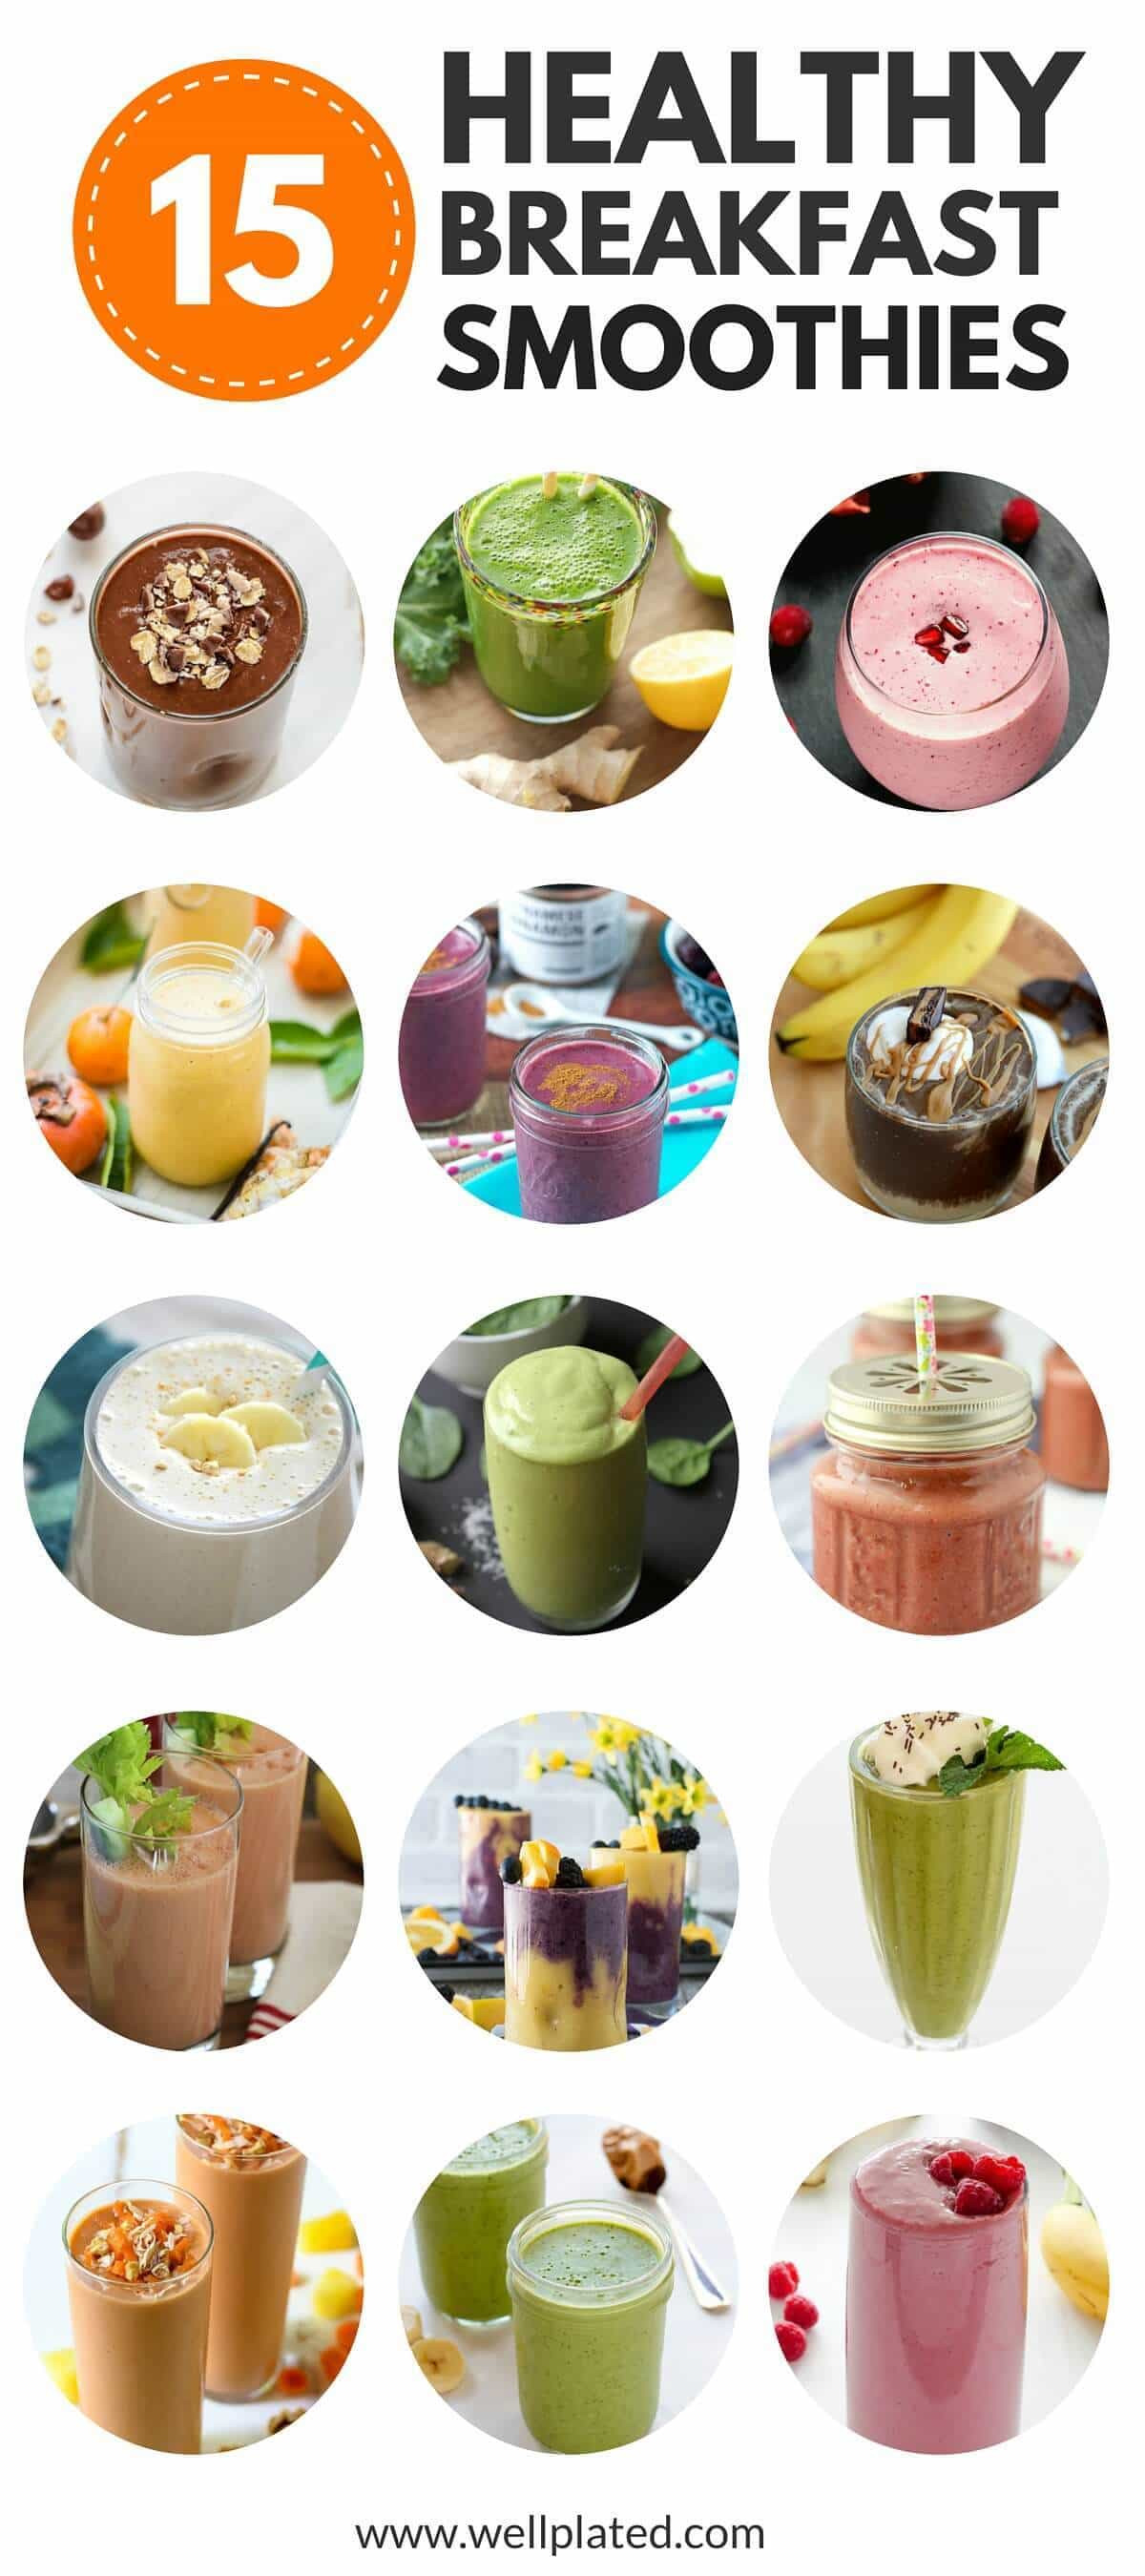 Healthy Breakfast Smoothie Recipes For Weight Loss
 The Best 15 Healthy Breakfast Smoothies